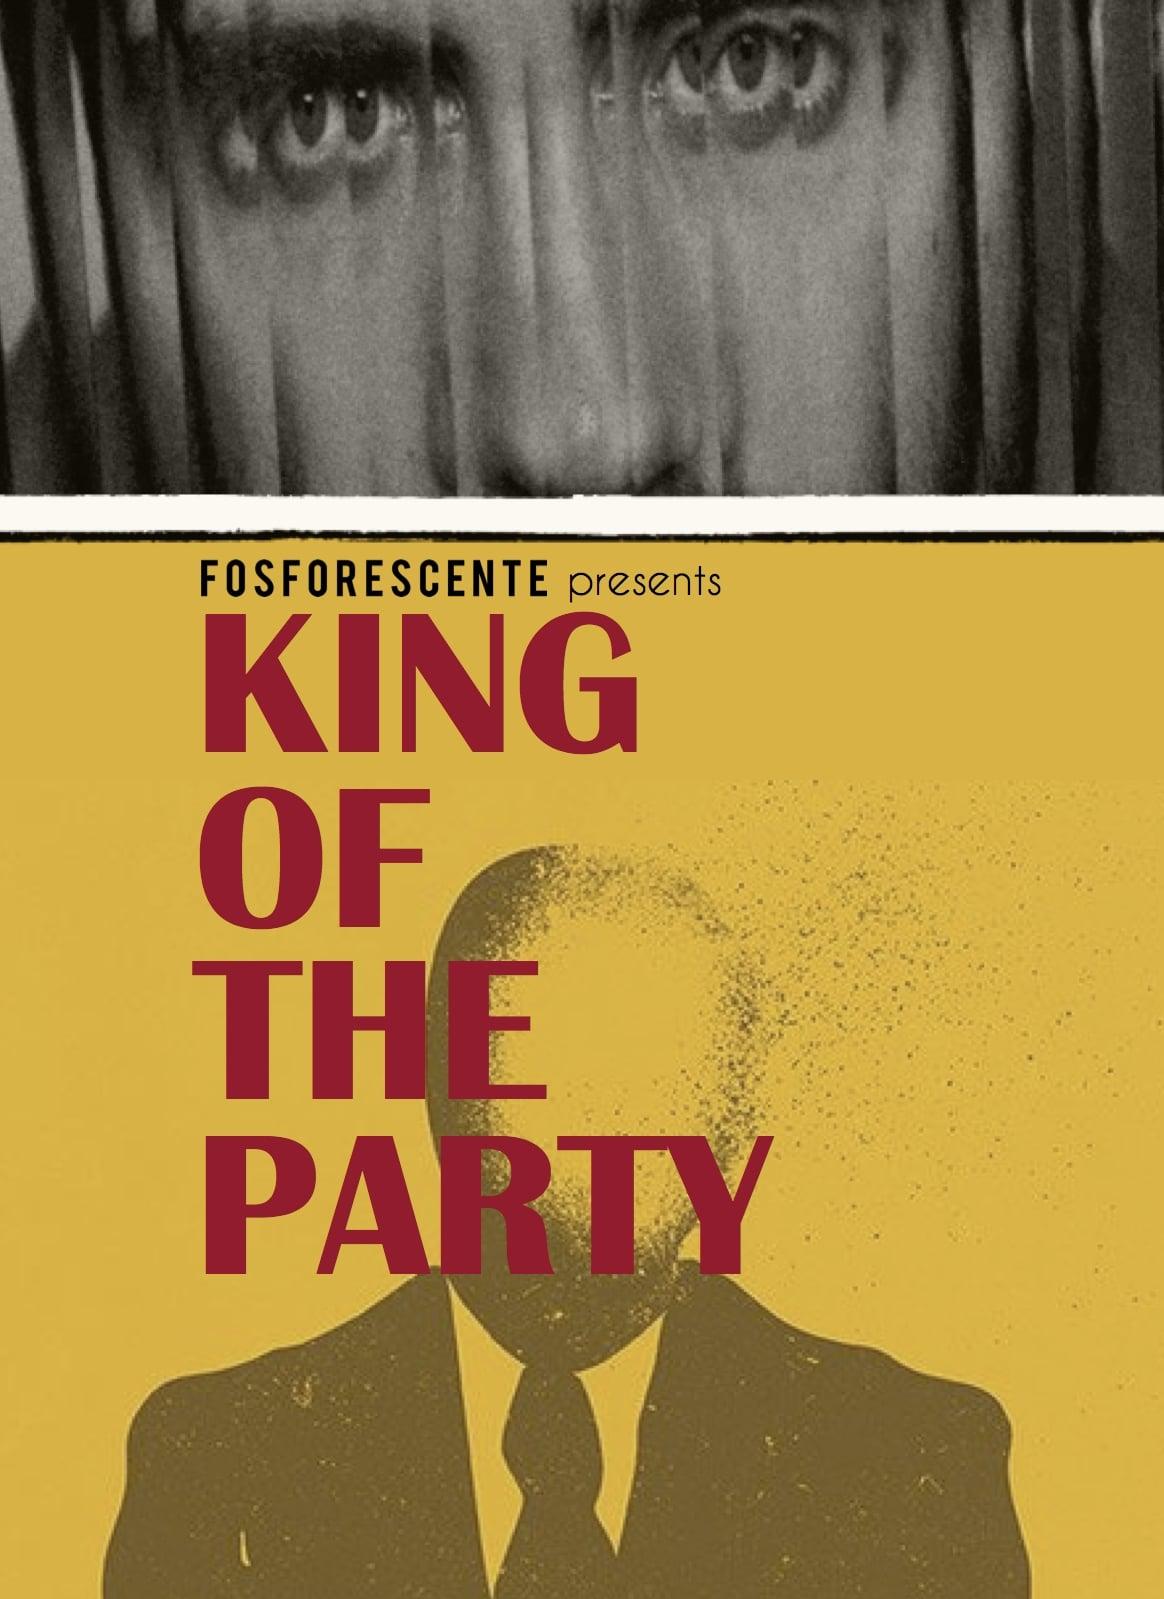 The King Of The Party poster